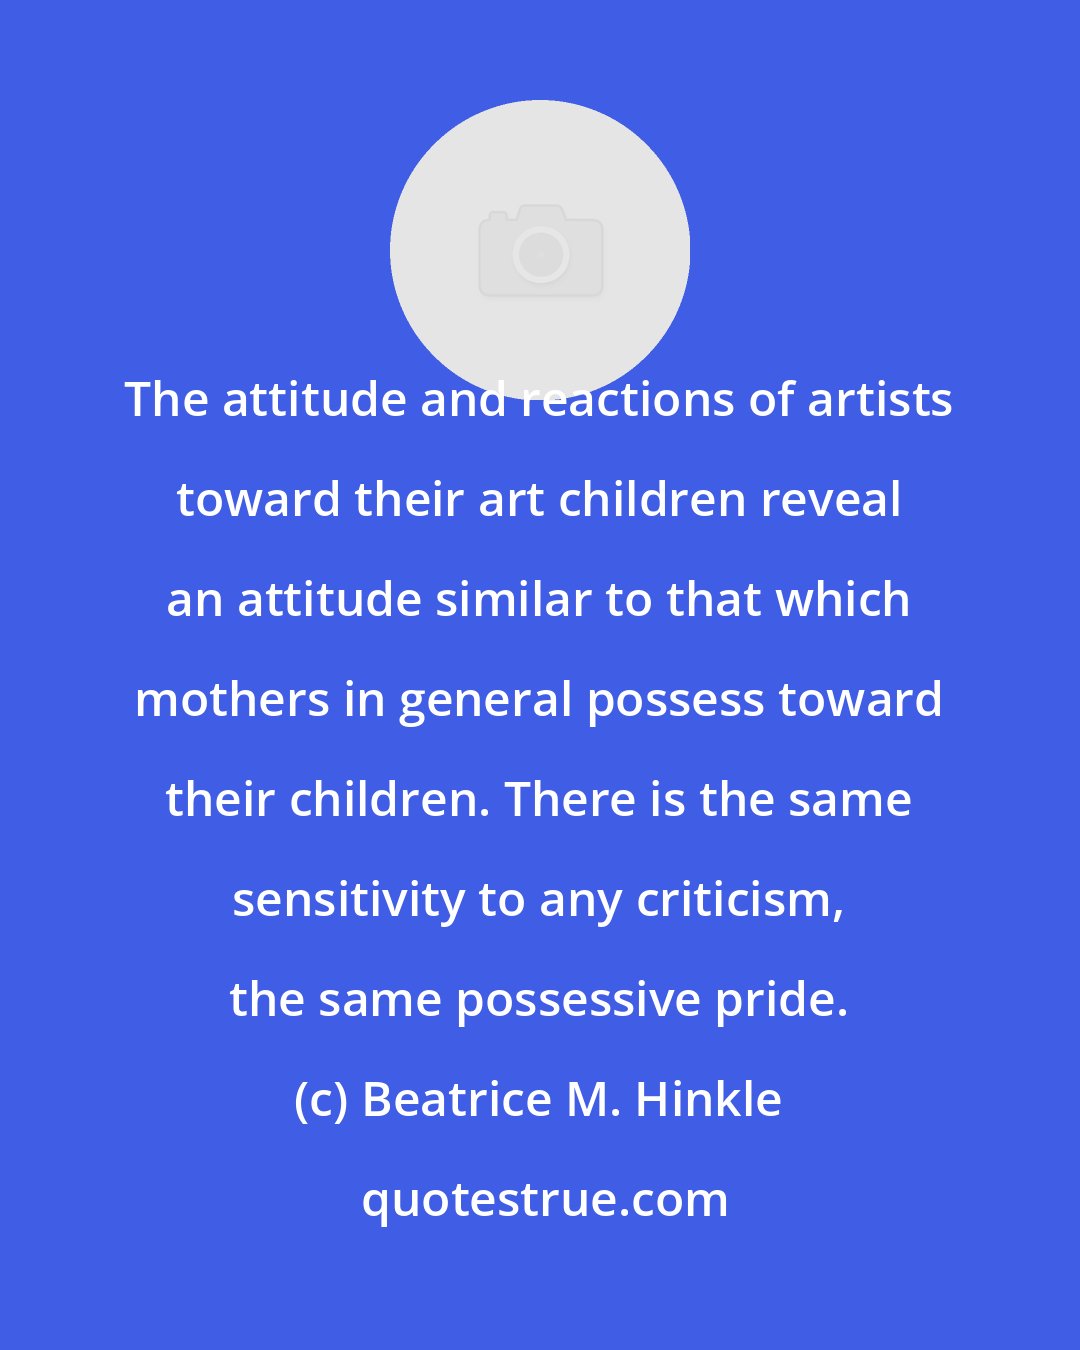 Beatrice M. Hinkle: The attitude and reactions of artists toward their art children reveal an attitude similar to that which mothers in general possess toward their children. There is the same sensitivity to any criticism, the same possessive pride.